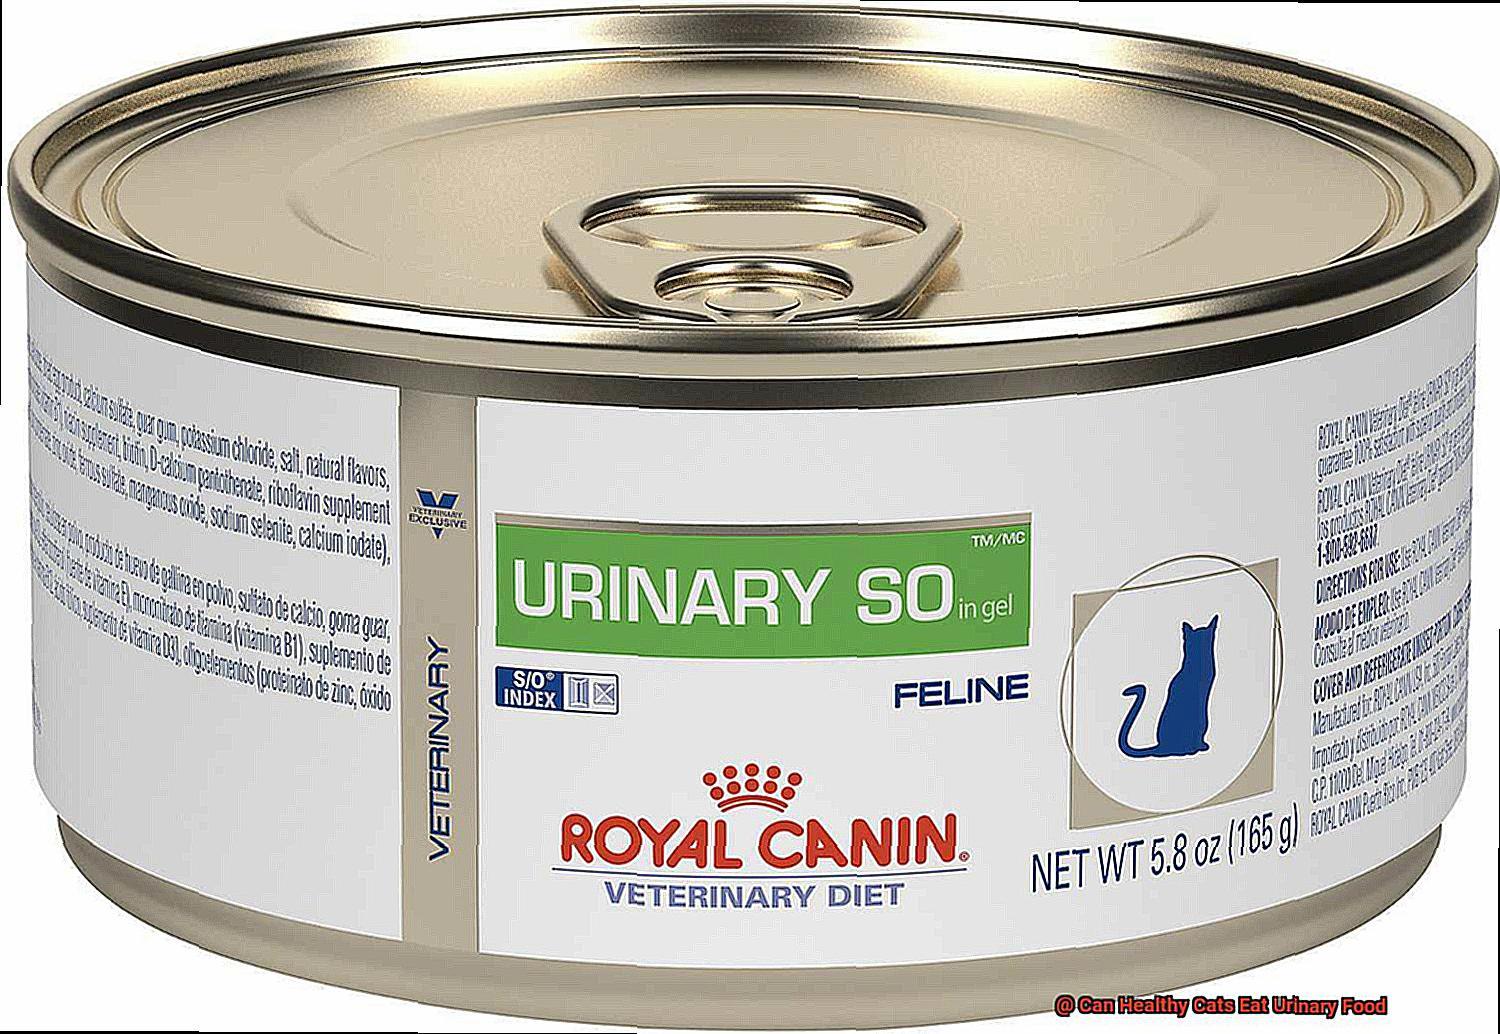 Can Healthy Cats Eat Urinary Food?